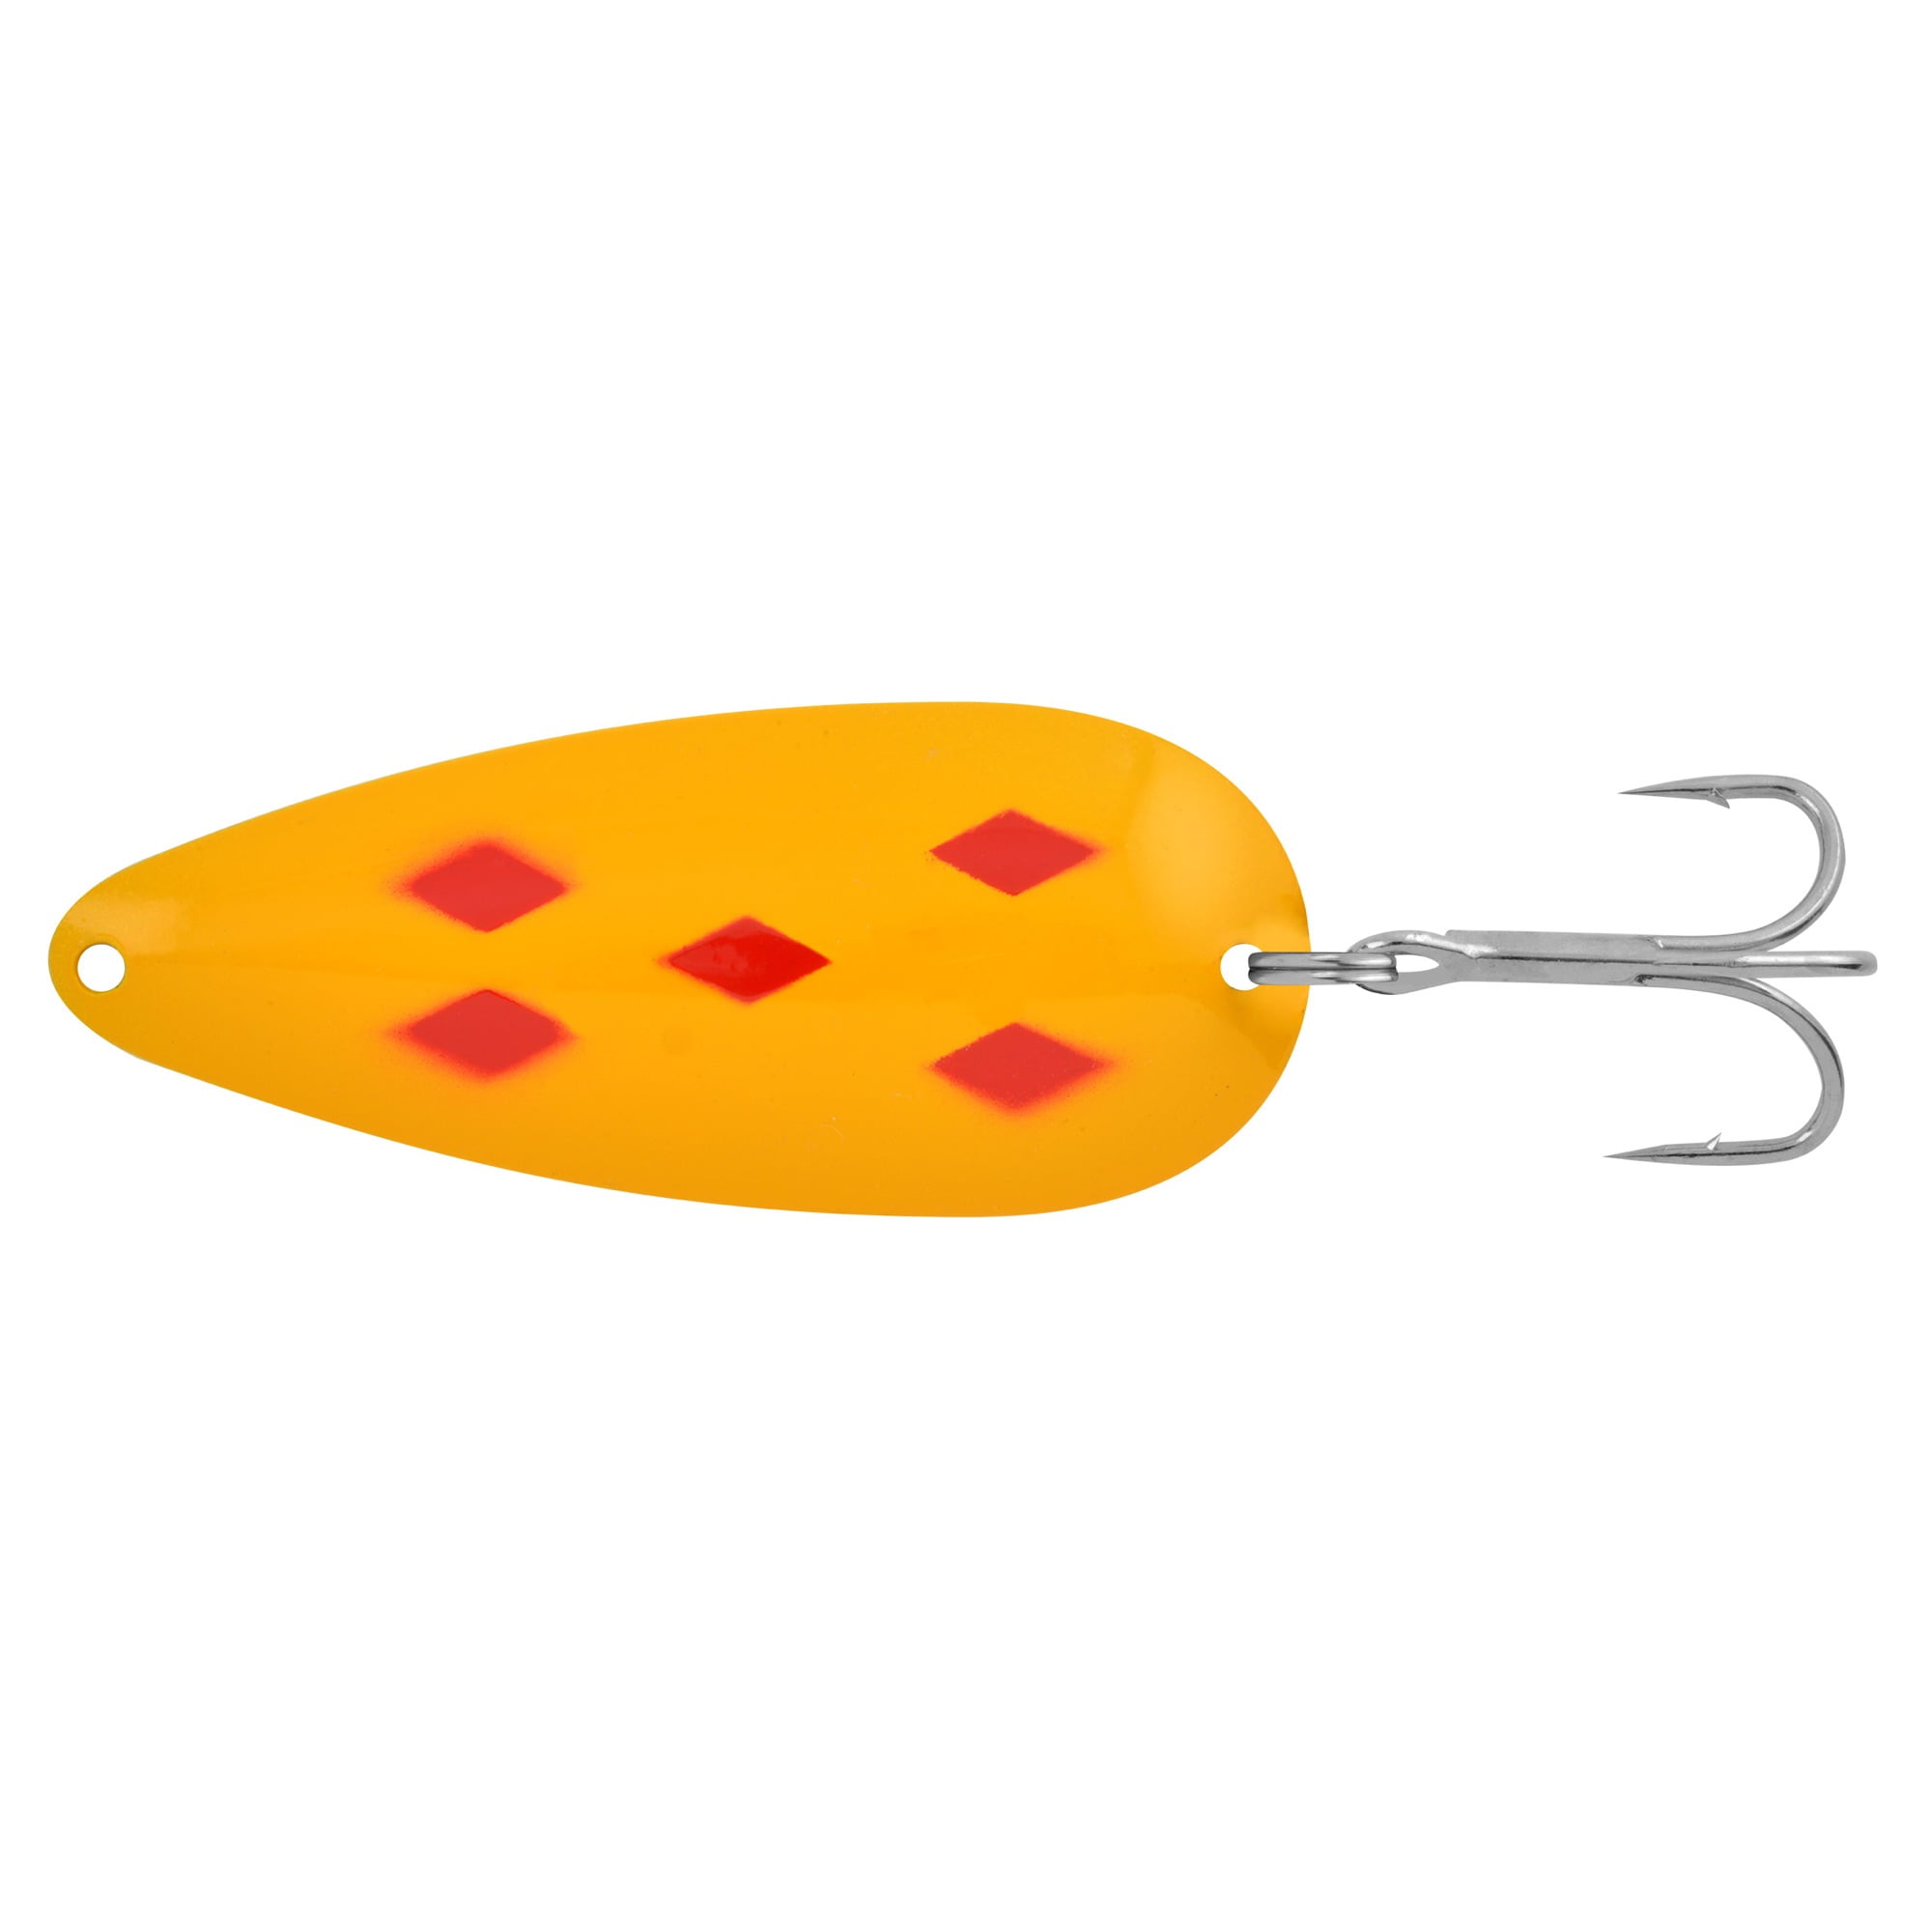 Dick Nite SPOONS set three wee 3 variety fish catching colors all size 0 